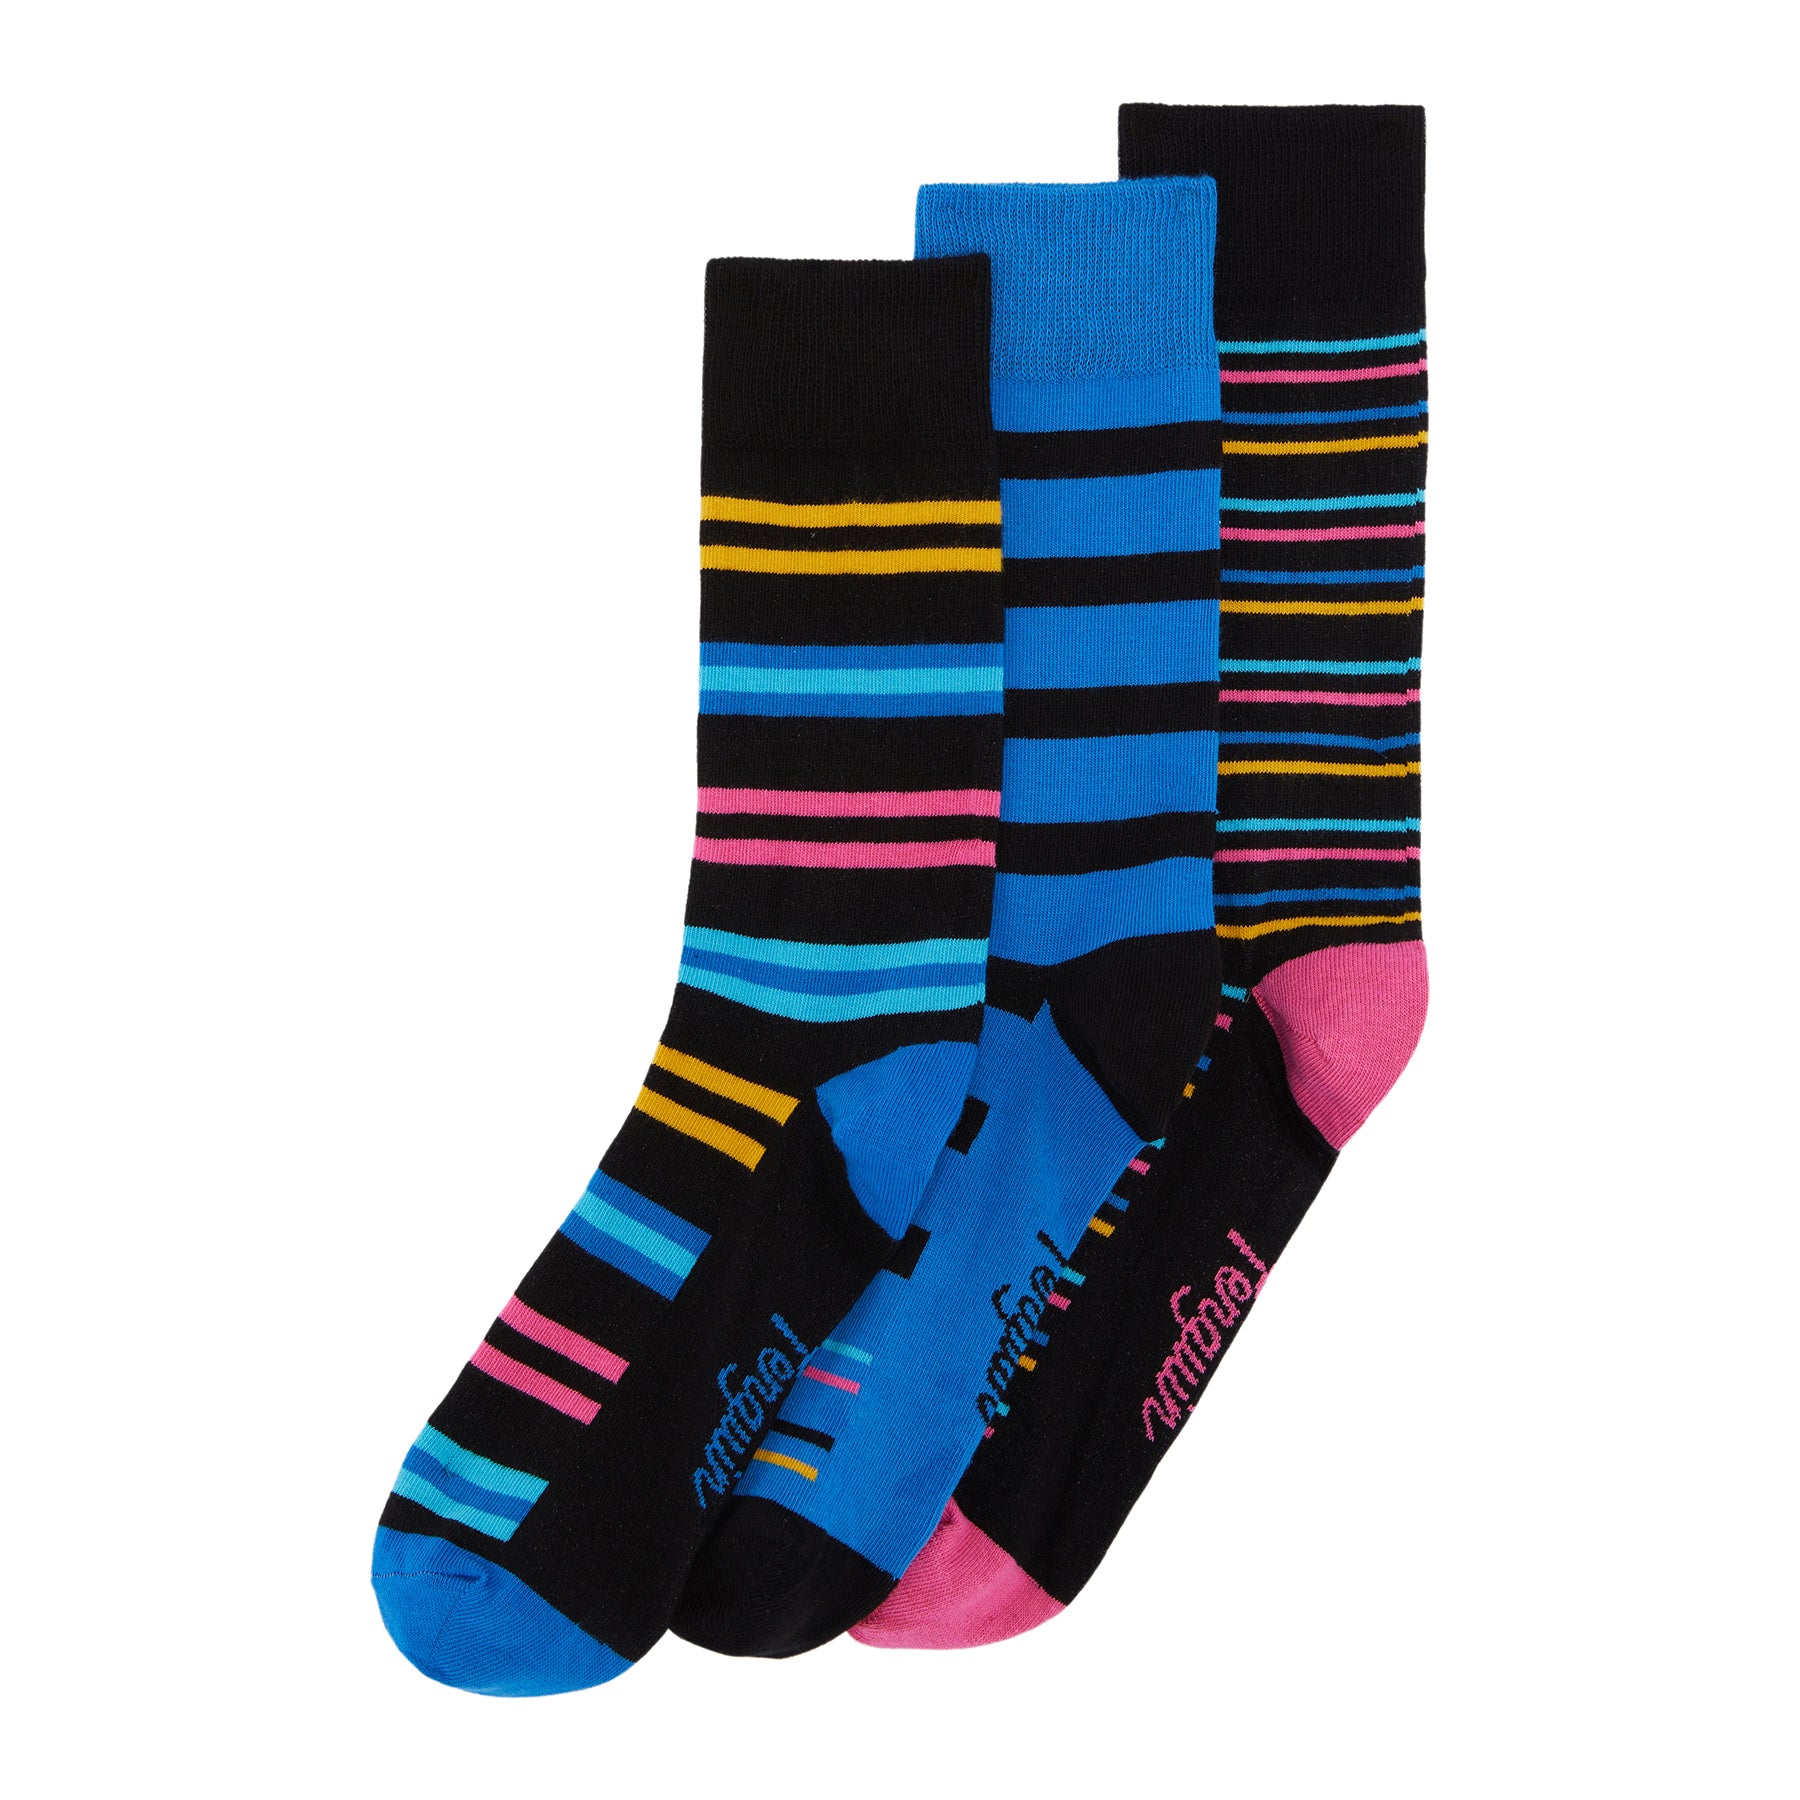 View 3 Pack Stripe Design Ankle Socks In Black And Blue information